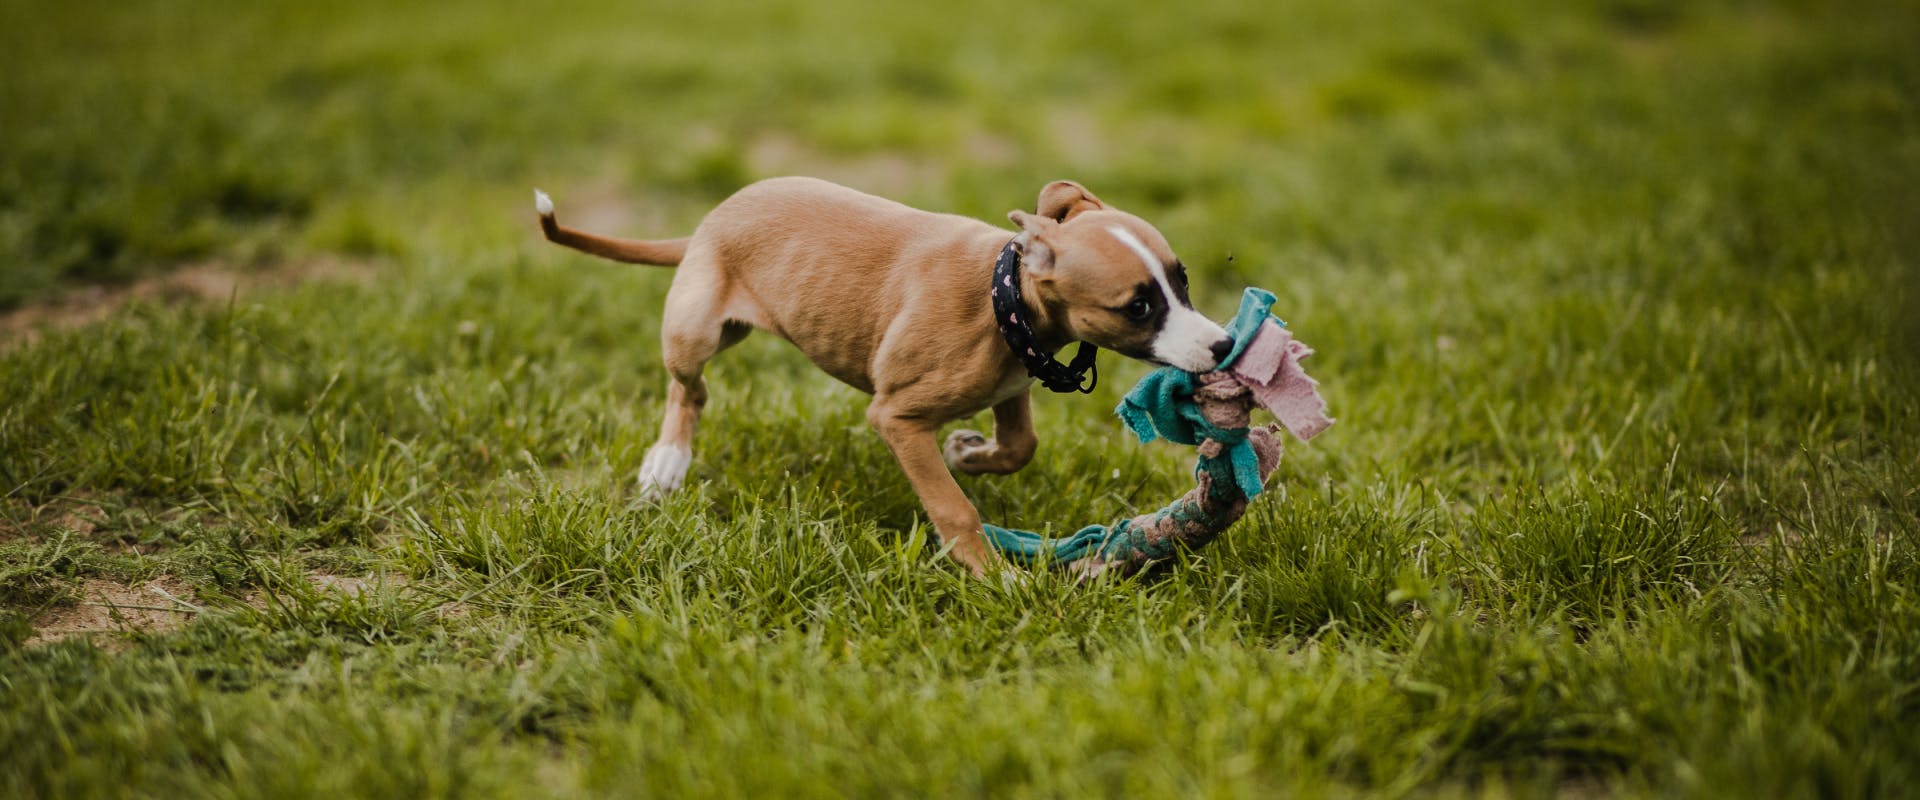 https://images.prismic.io/trustedhousesitters/210752c8-c273-484f-897c-16f0b64bbc44_diy+rope+toys+for+dogs.png?auto=compress,format&rect=0,0,1920,800&w=1920&h=800